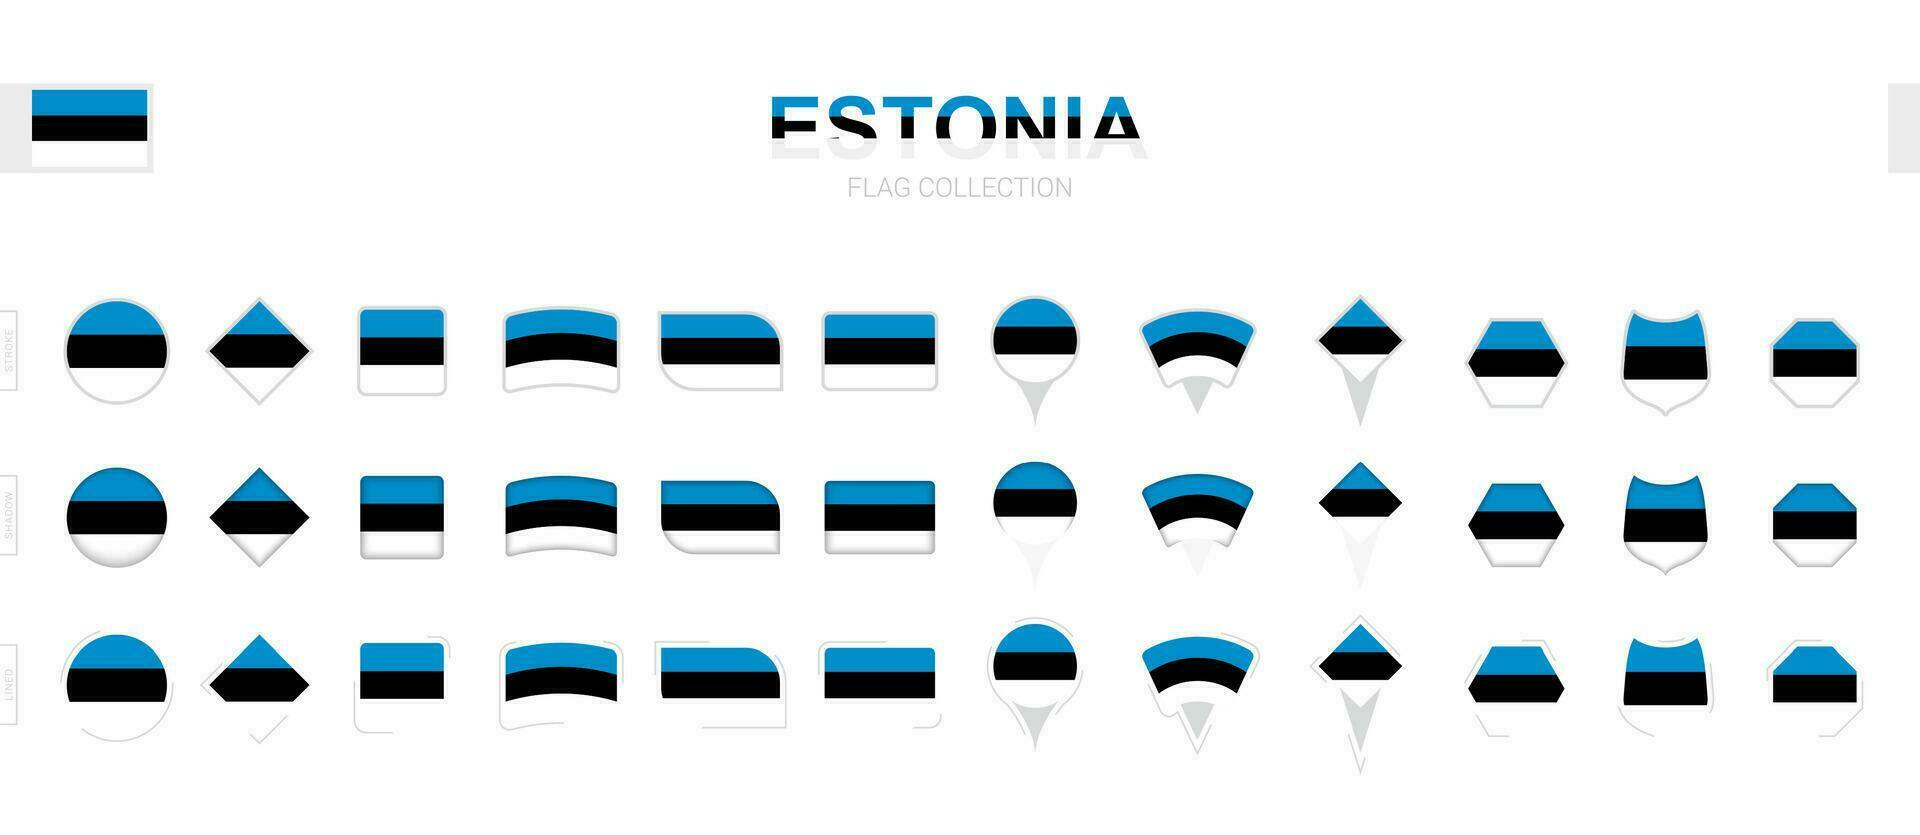 Large collection of Estonia flags of various shapes and effects. vector